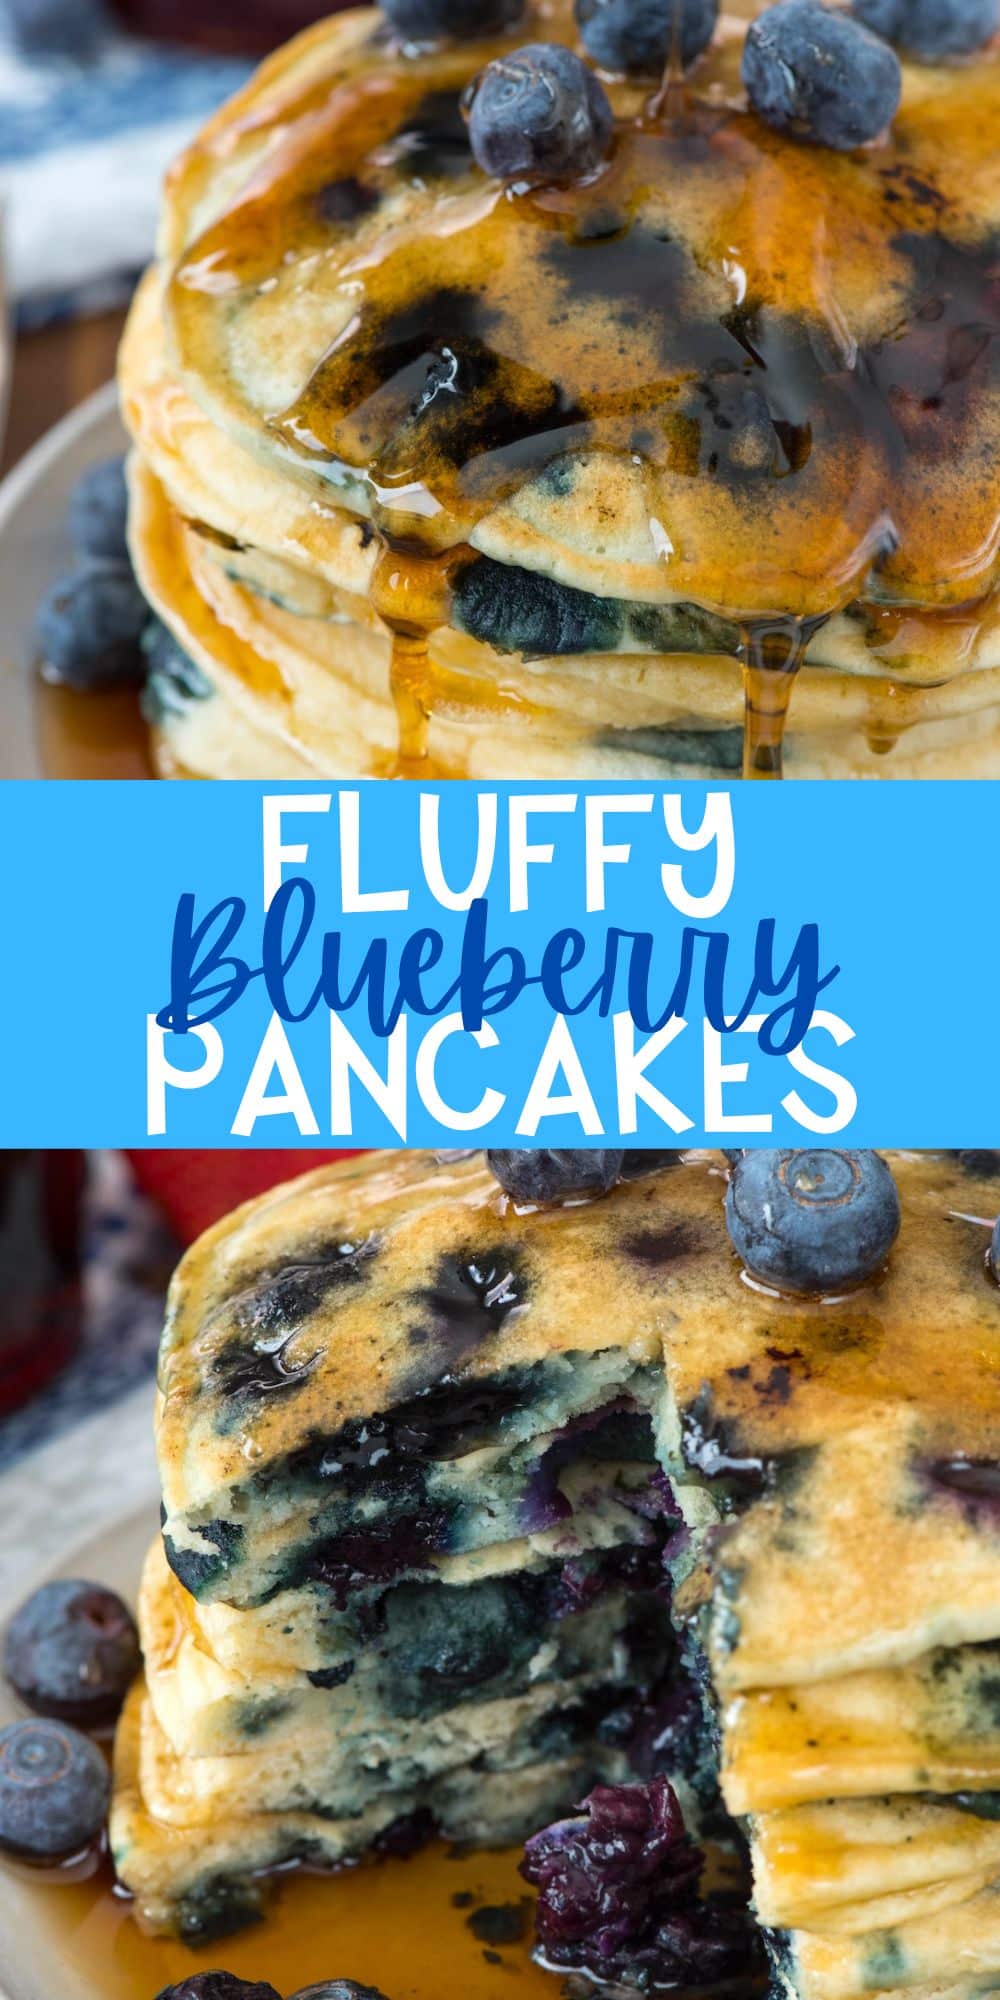 two photos of stacked pancakes with blueberries baked in and covered in syrup with words on the image.